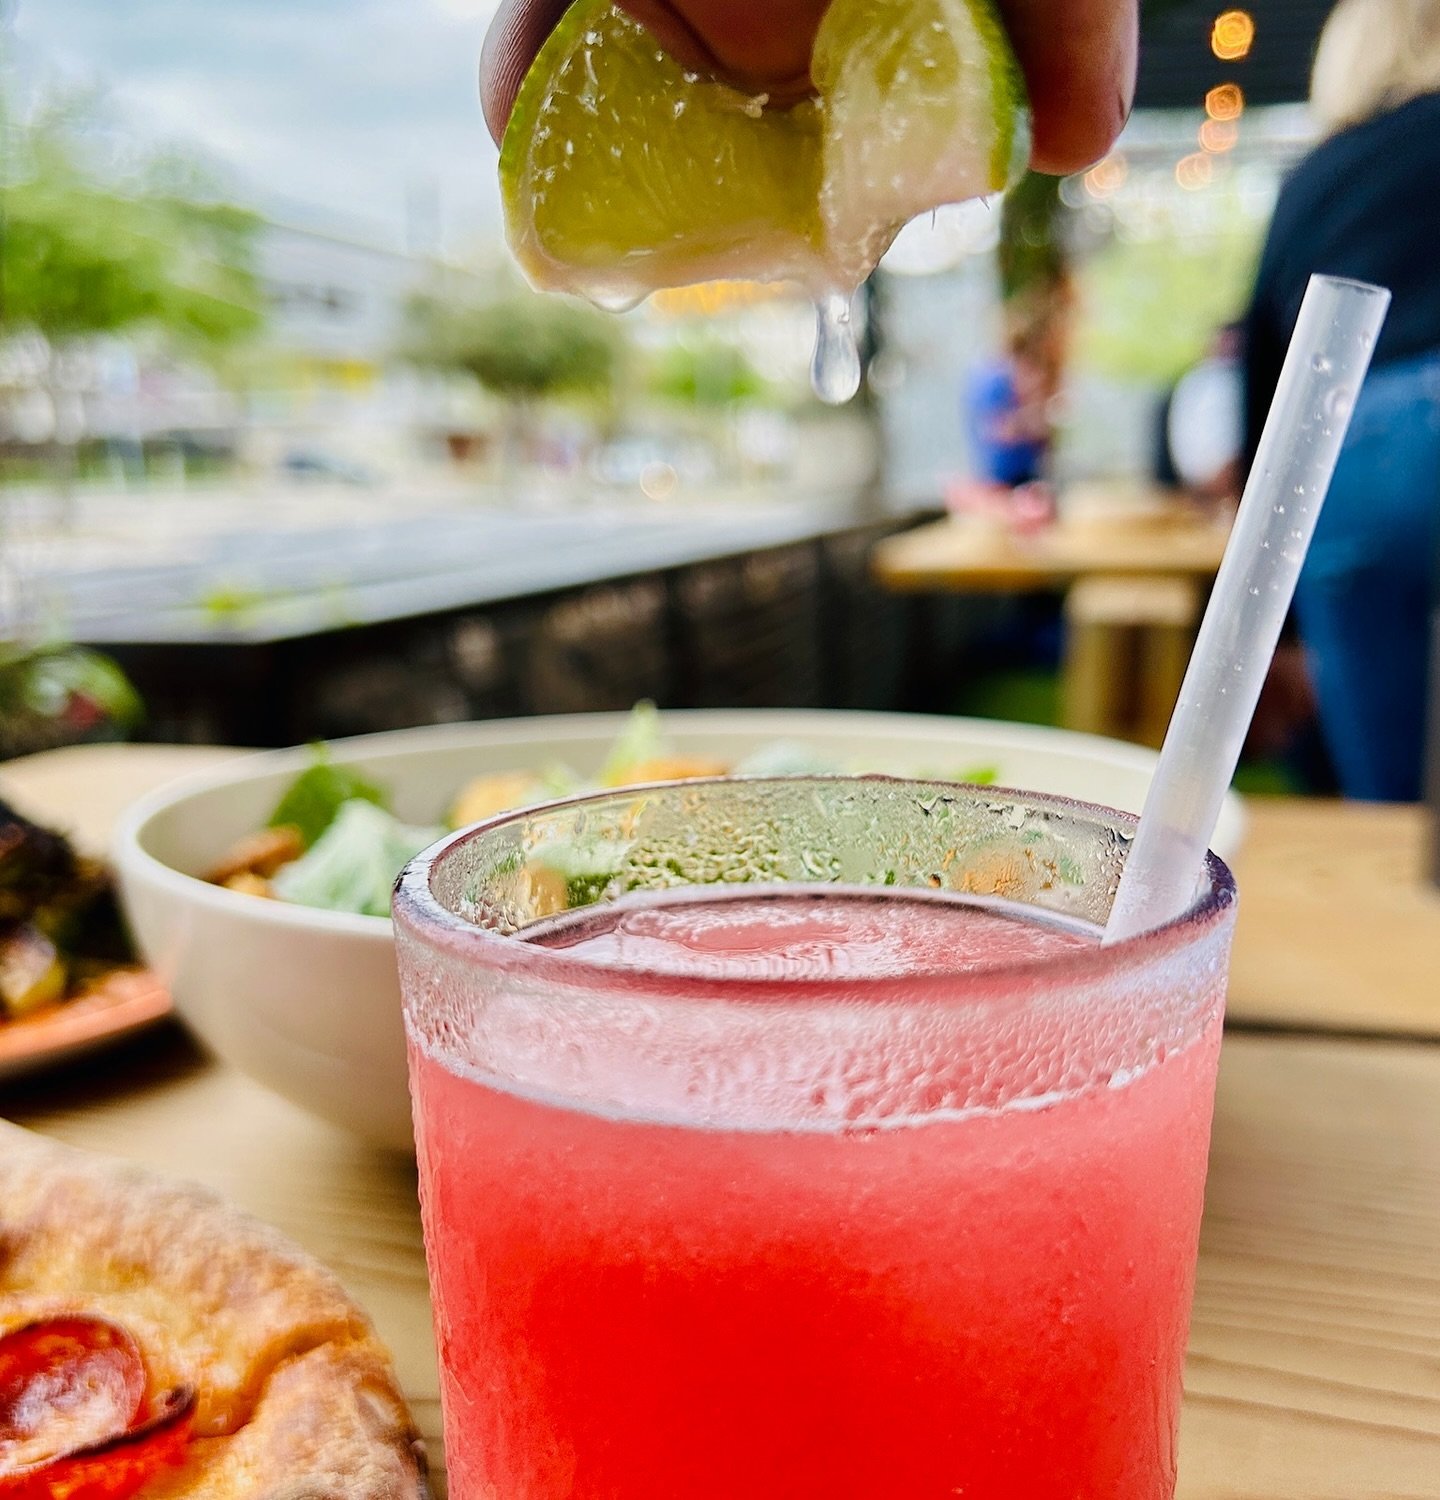 Unquestionably a &lsquo;lounge with a cocktail on the patio&rsquo; kind of day&mdash;patio time is the best time! #sunsoutfunsout #lovesupremepizza #austintexas #patioweather